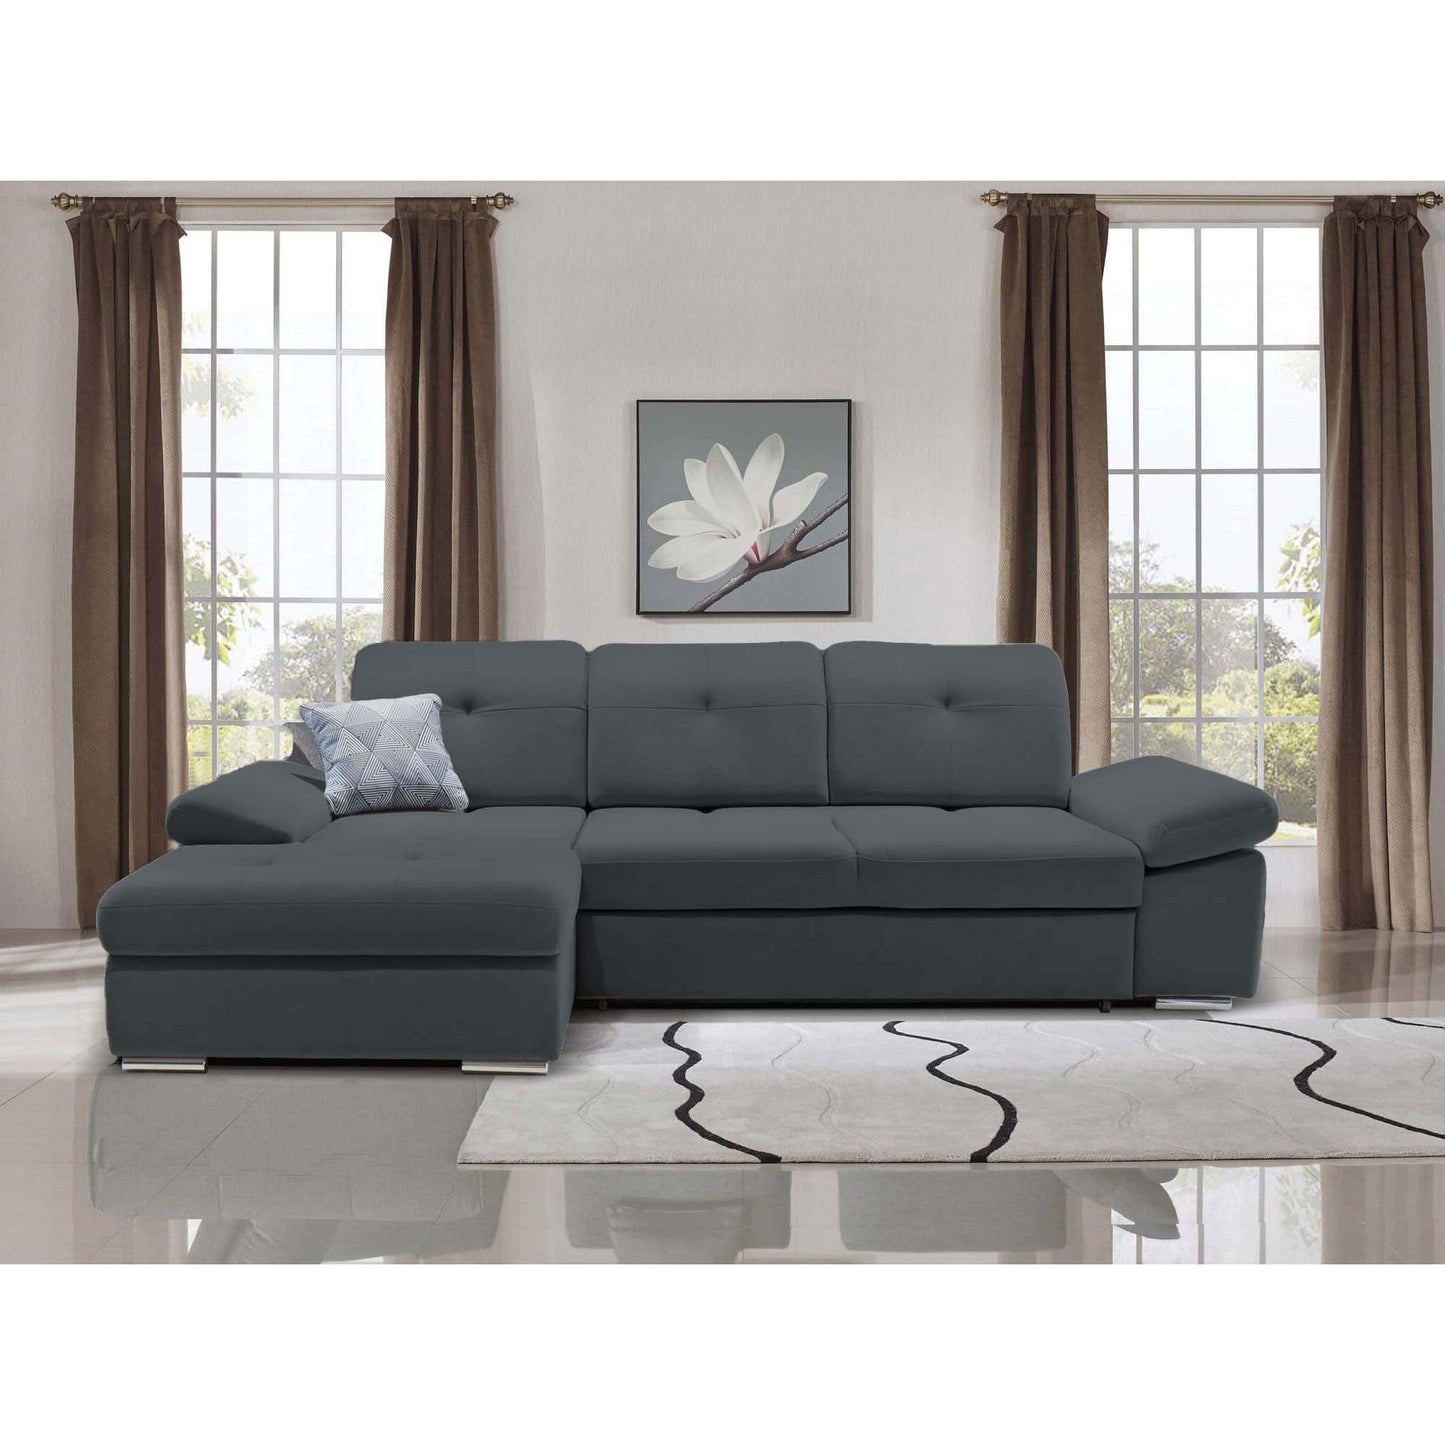 Lion Sectional Sofa Sleeper in Perfect Dark Gray